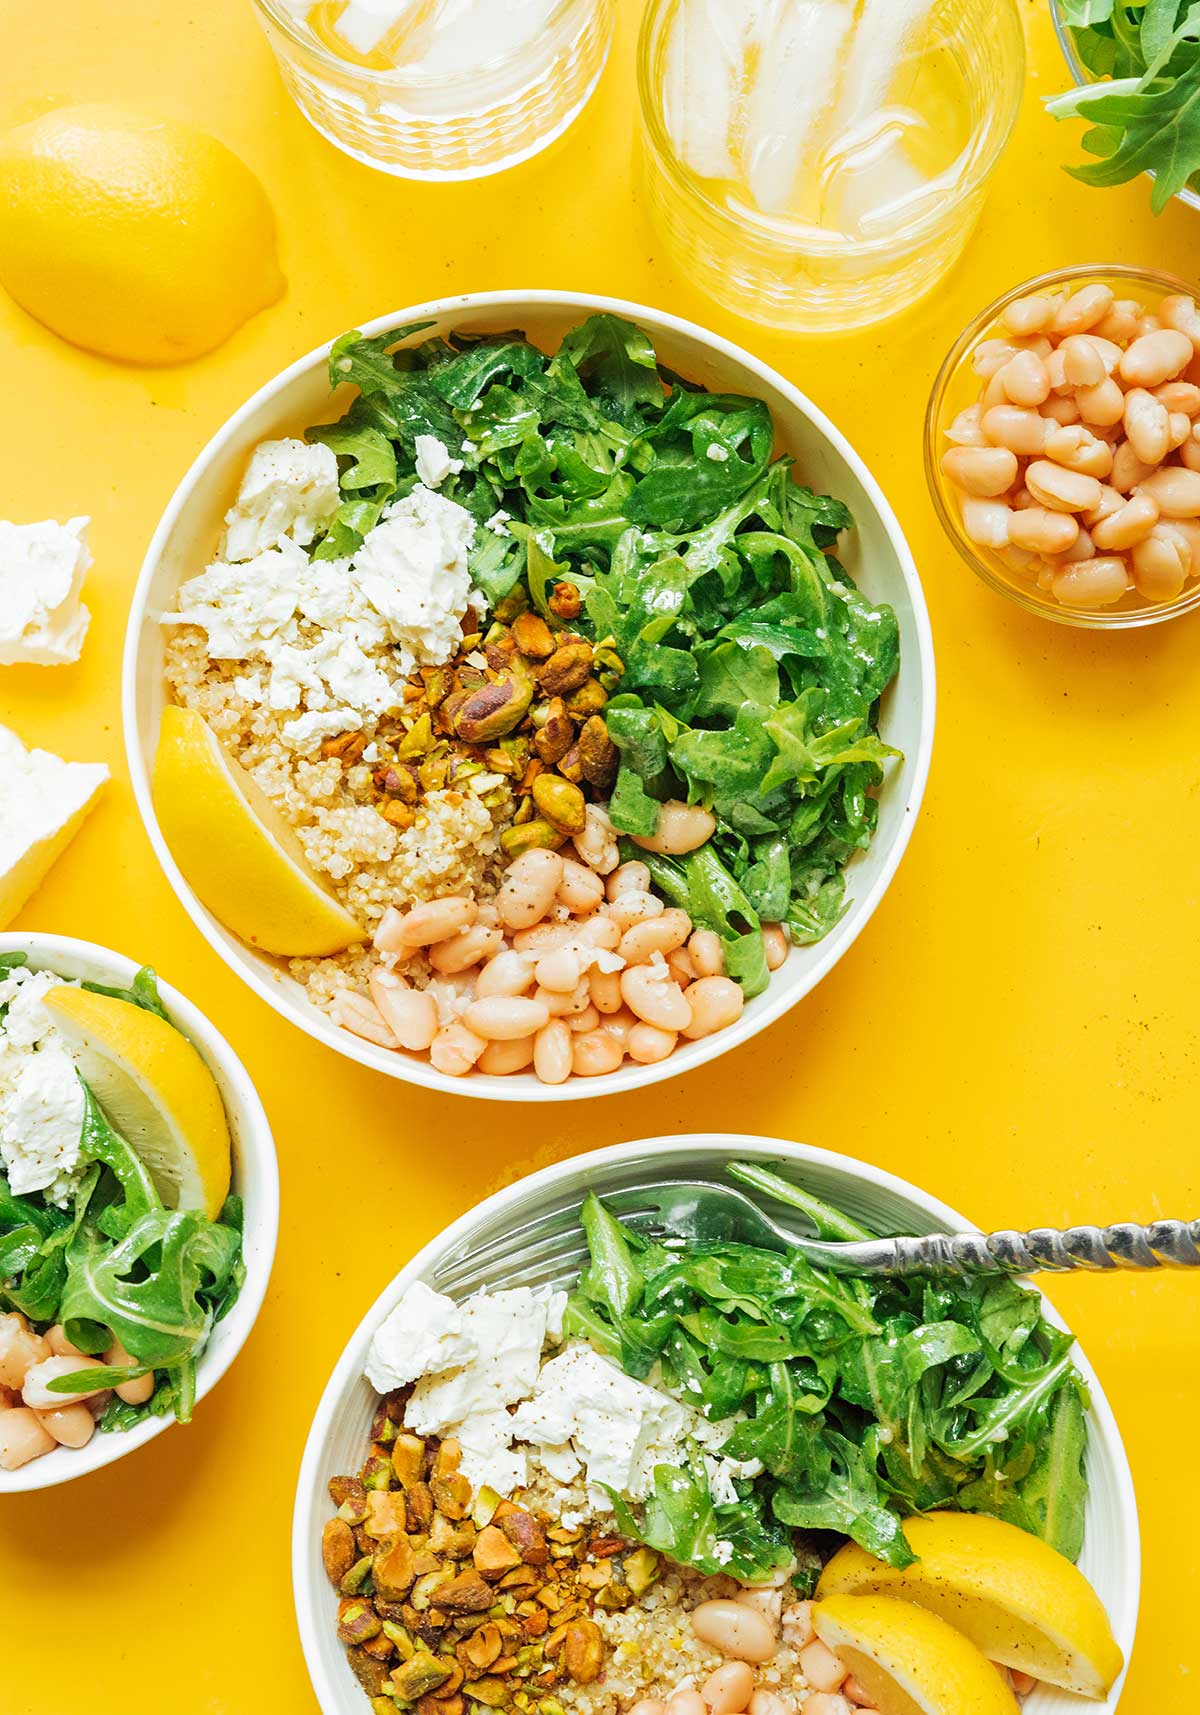 A arugula power bowl topped with pistachios, feta cheese, navy beans, and lemon dressing